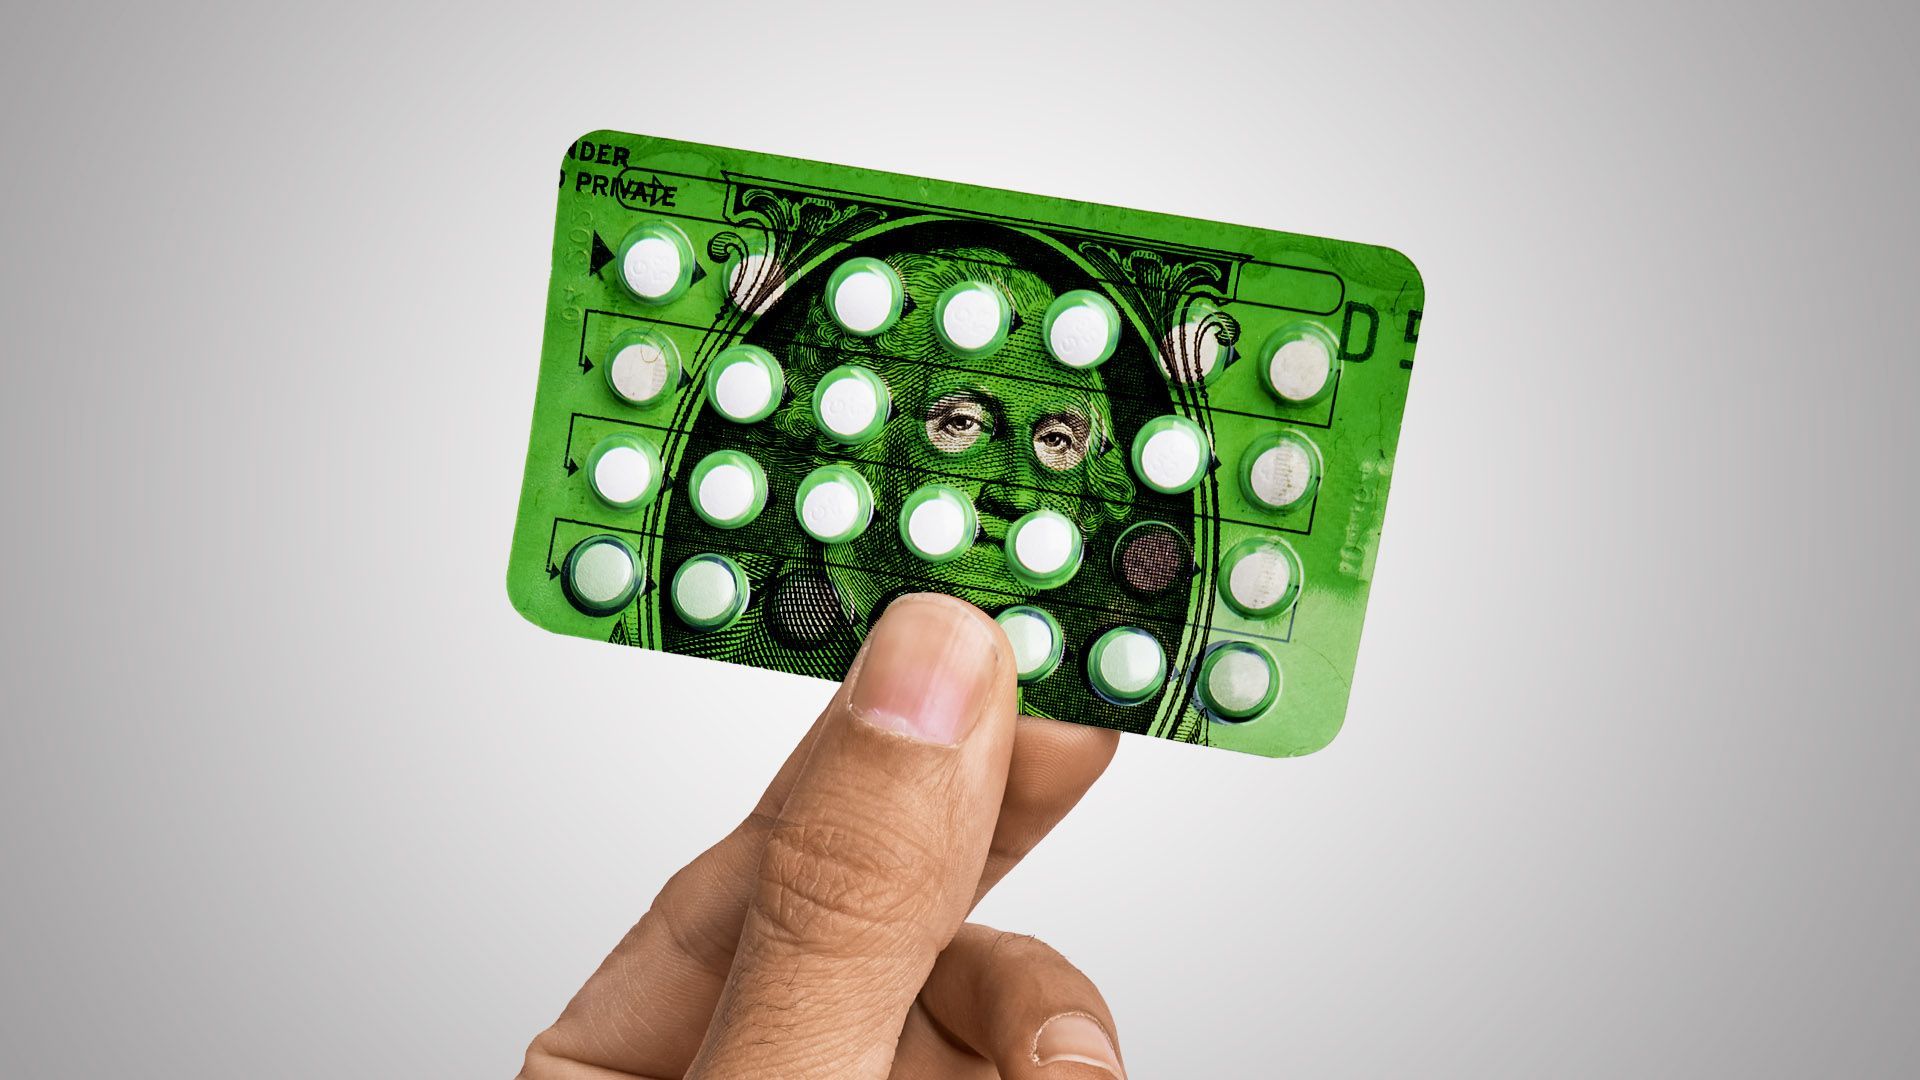 Illustration of a hand holding a packet of birth control pills with dollar bill imagery overlayed